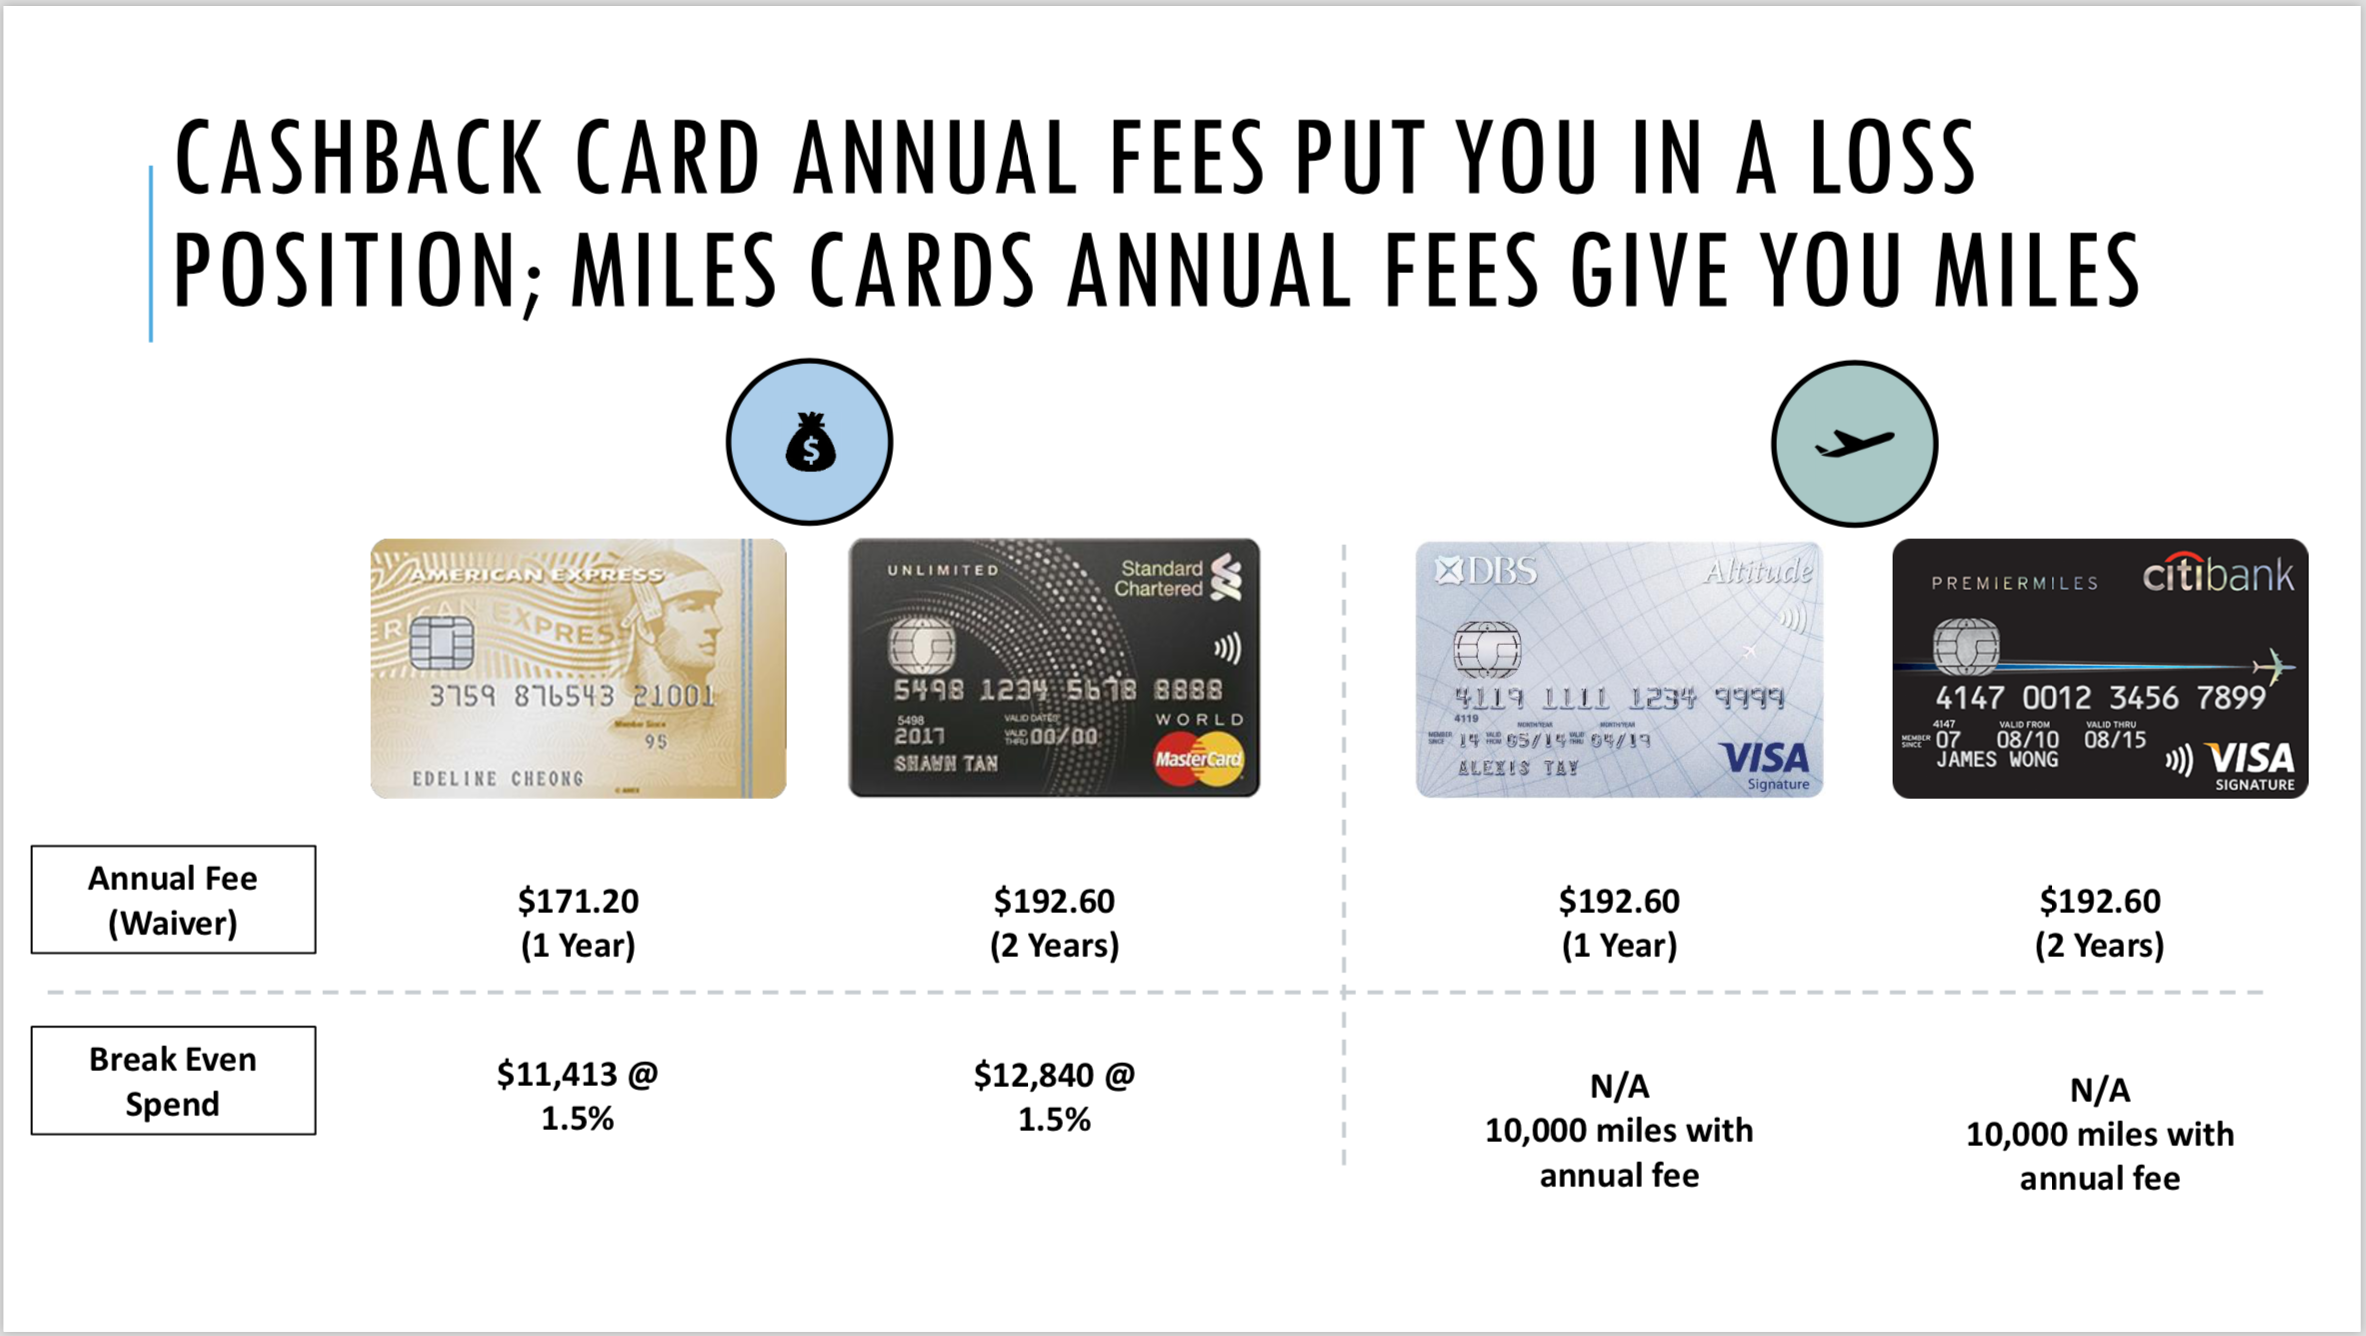 Annual fees of cashback vs miles credit cards, and their break even spend. 